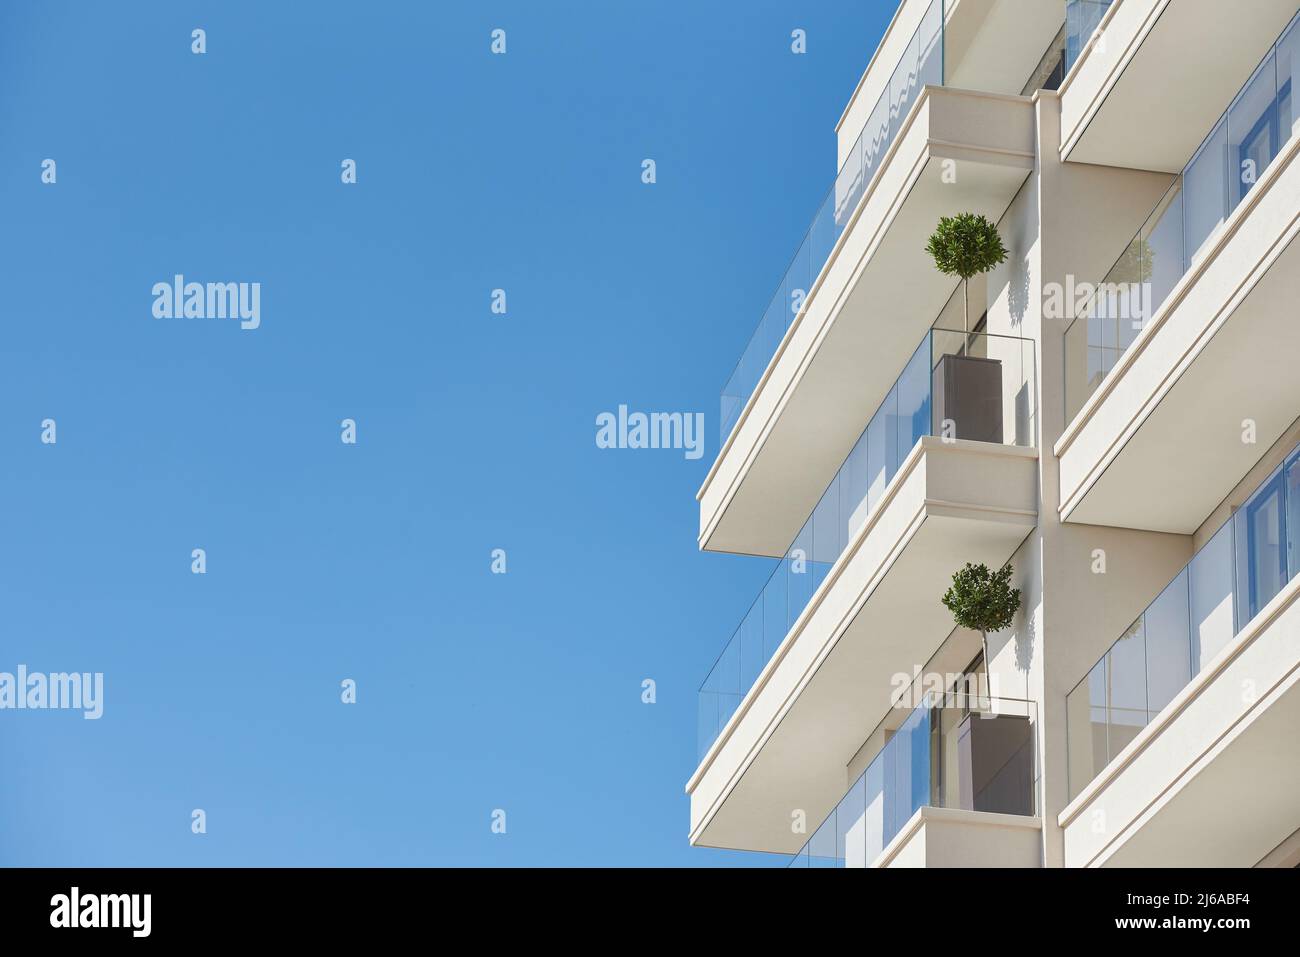 Balcony with glass railing in a modern apartment building against a blue sky with a copy space Stock Photo